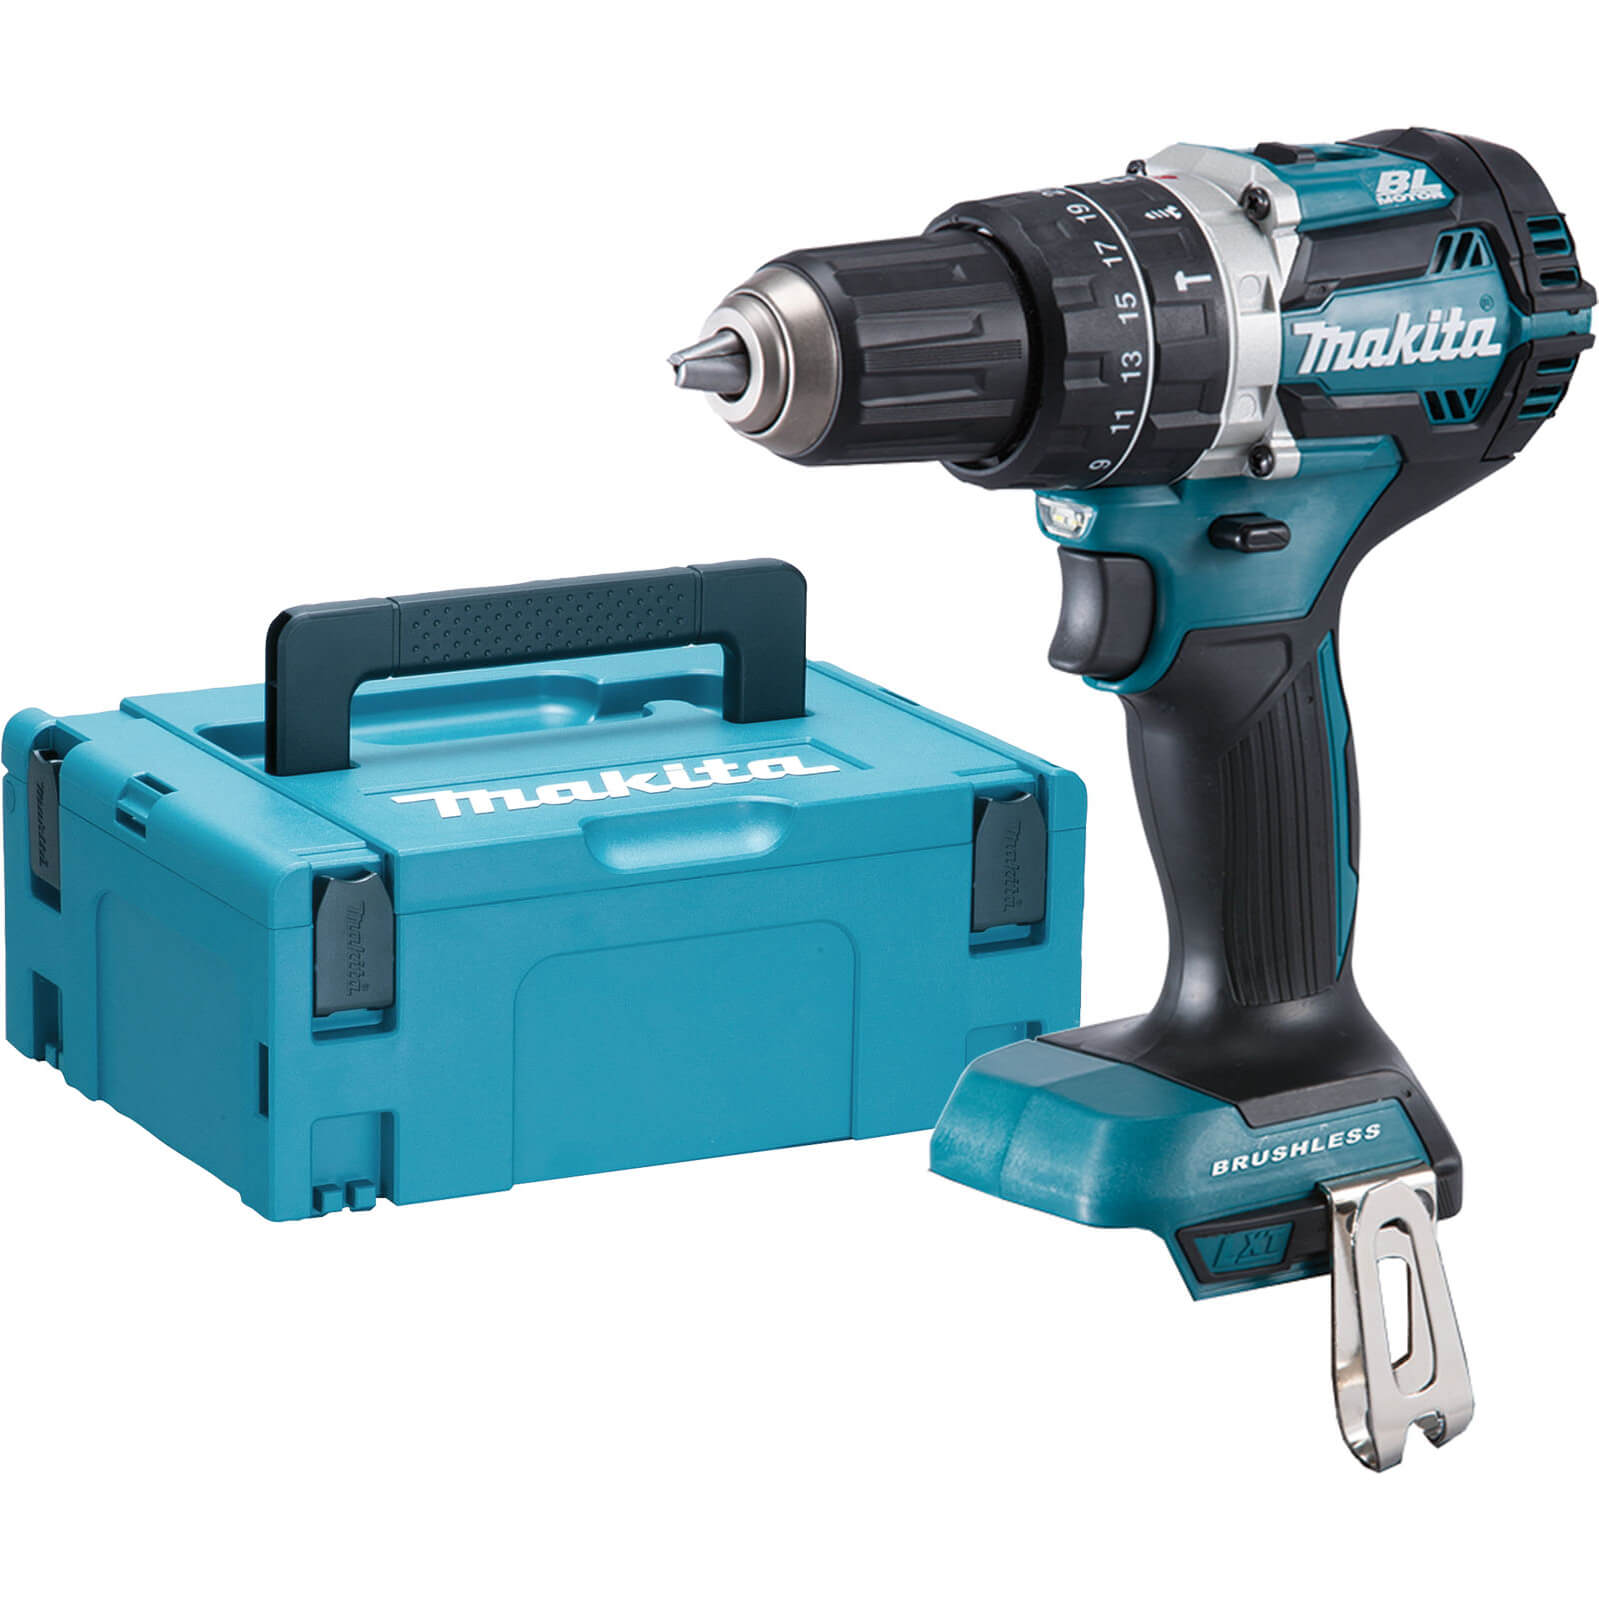 Image of Makita DHP484 18v LXT Cordless Brushless Combi Drill No Batteries No Charger Case